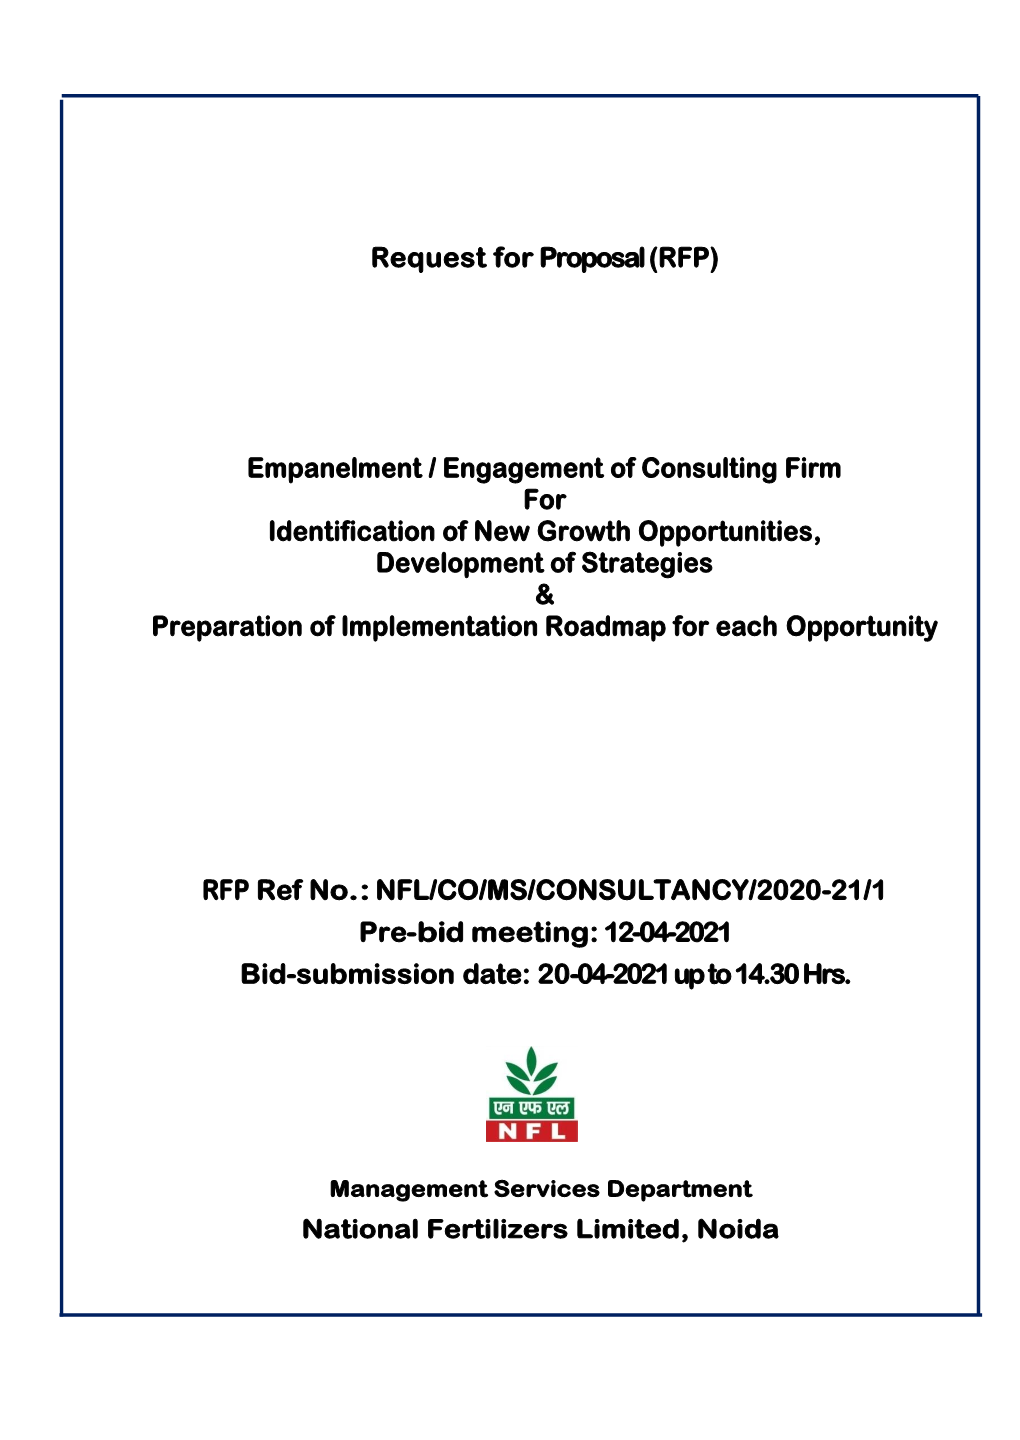 (RFP) Empanelment / Engagement of Consulting Firm for Identification Of